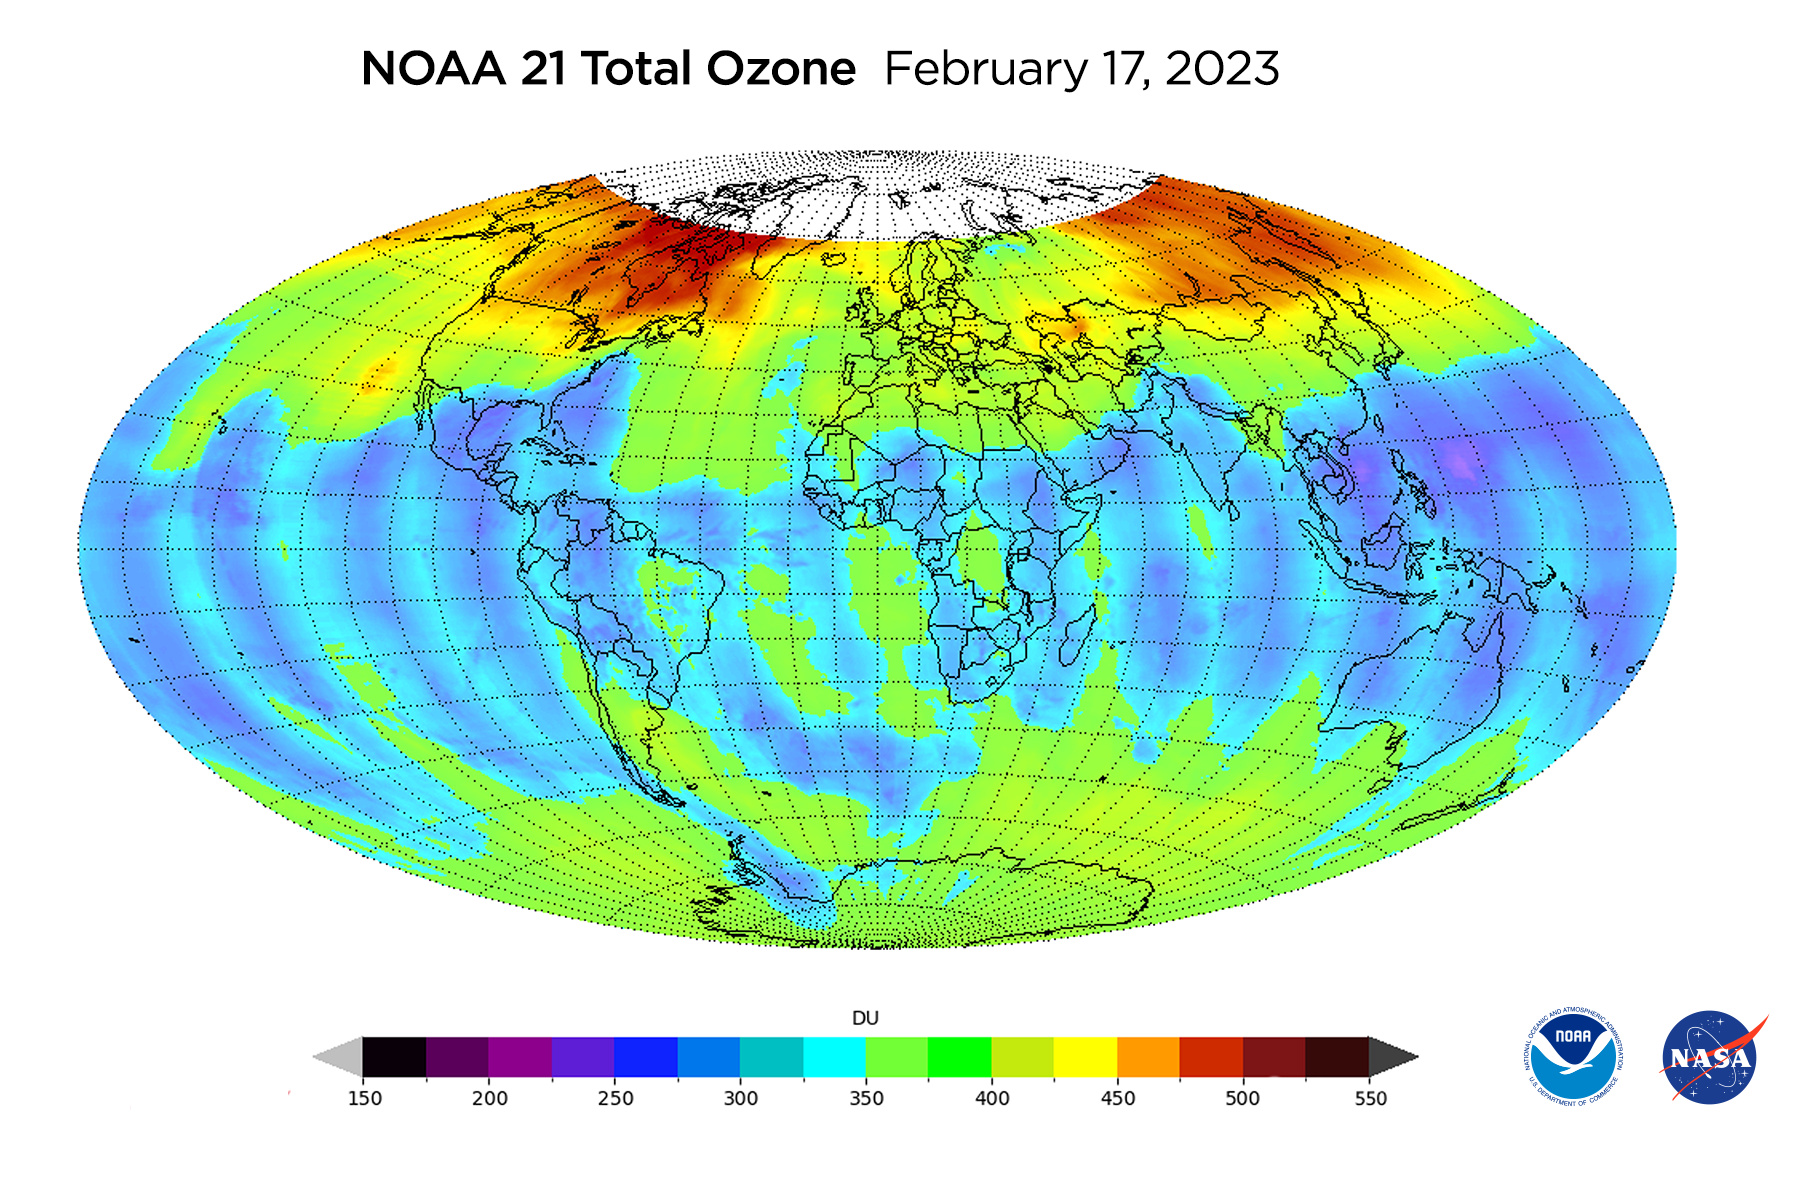 Ozone-Measuring Instrument on NOAA-21 Satellite Captures its First Images 